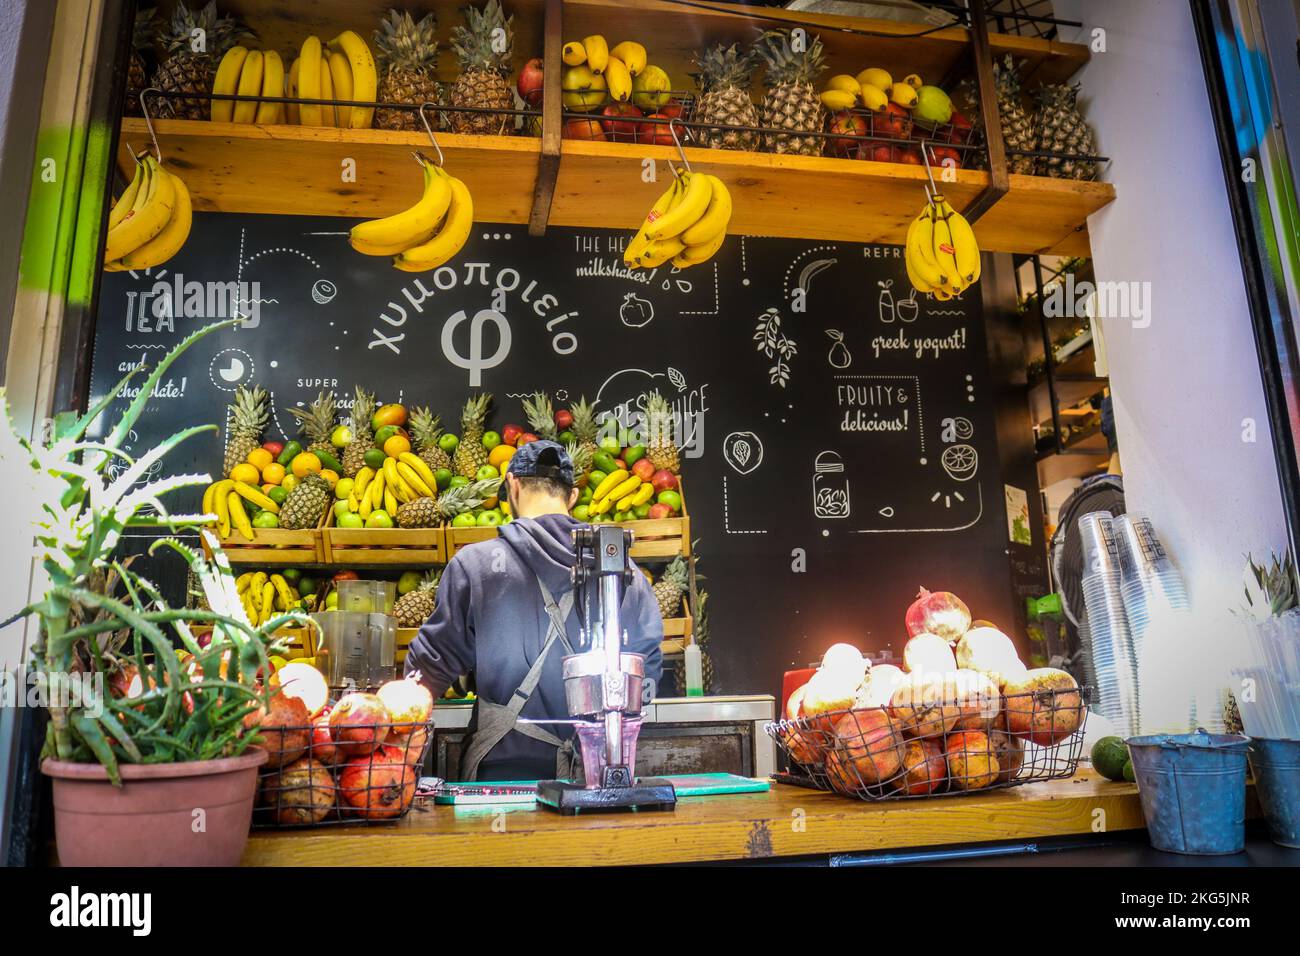 01-03-2018 Athens Greece - Open air fFruit juice stand with male server and piles of fruit - Bright sun shining in Stock Photo